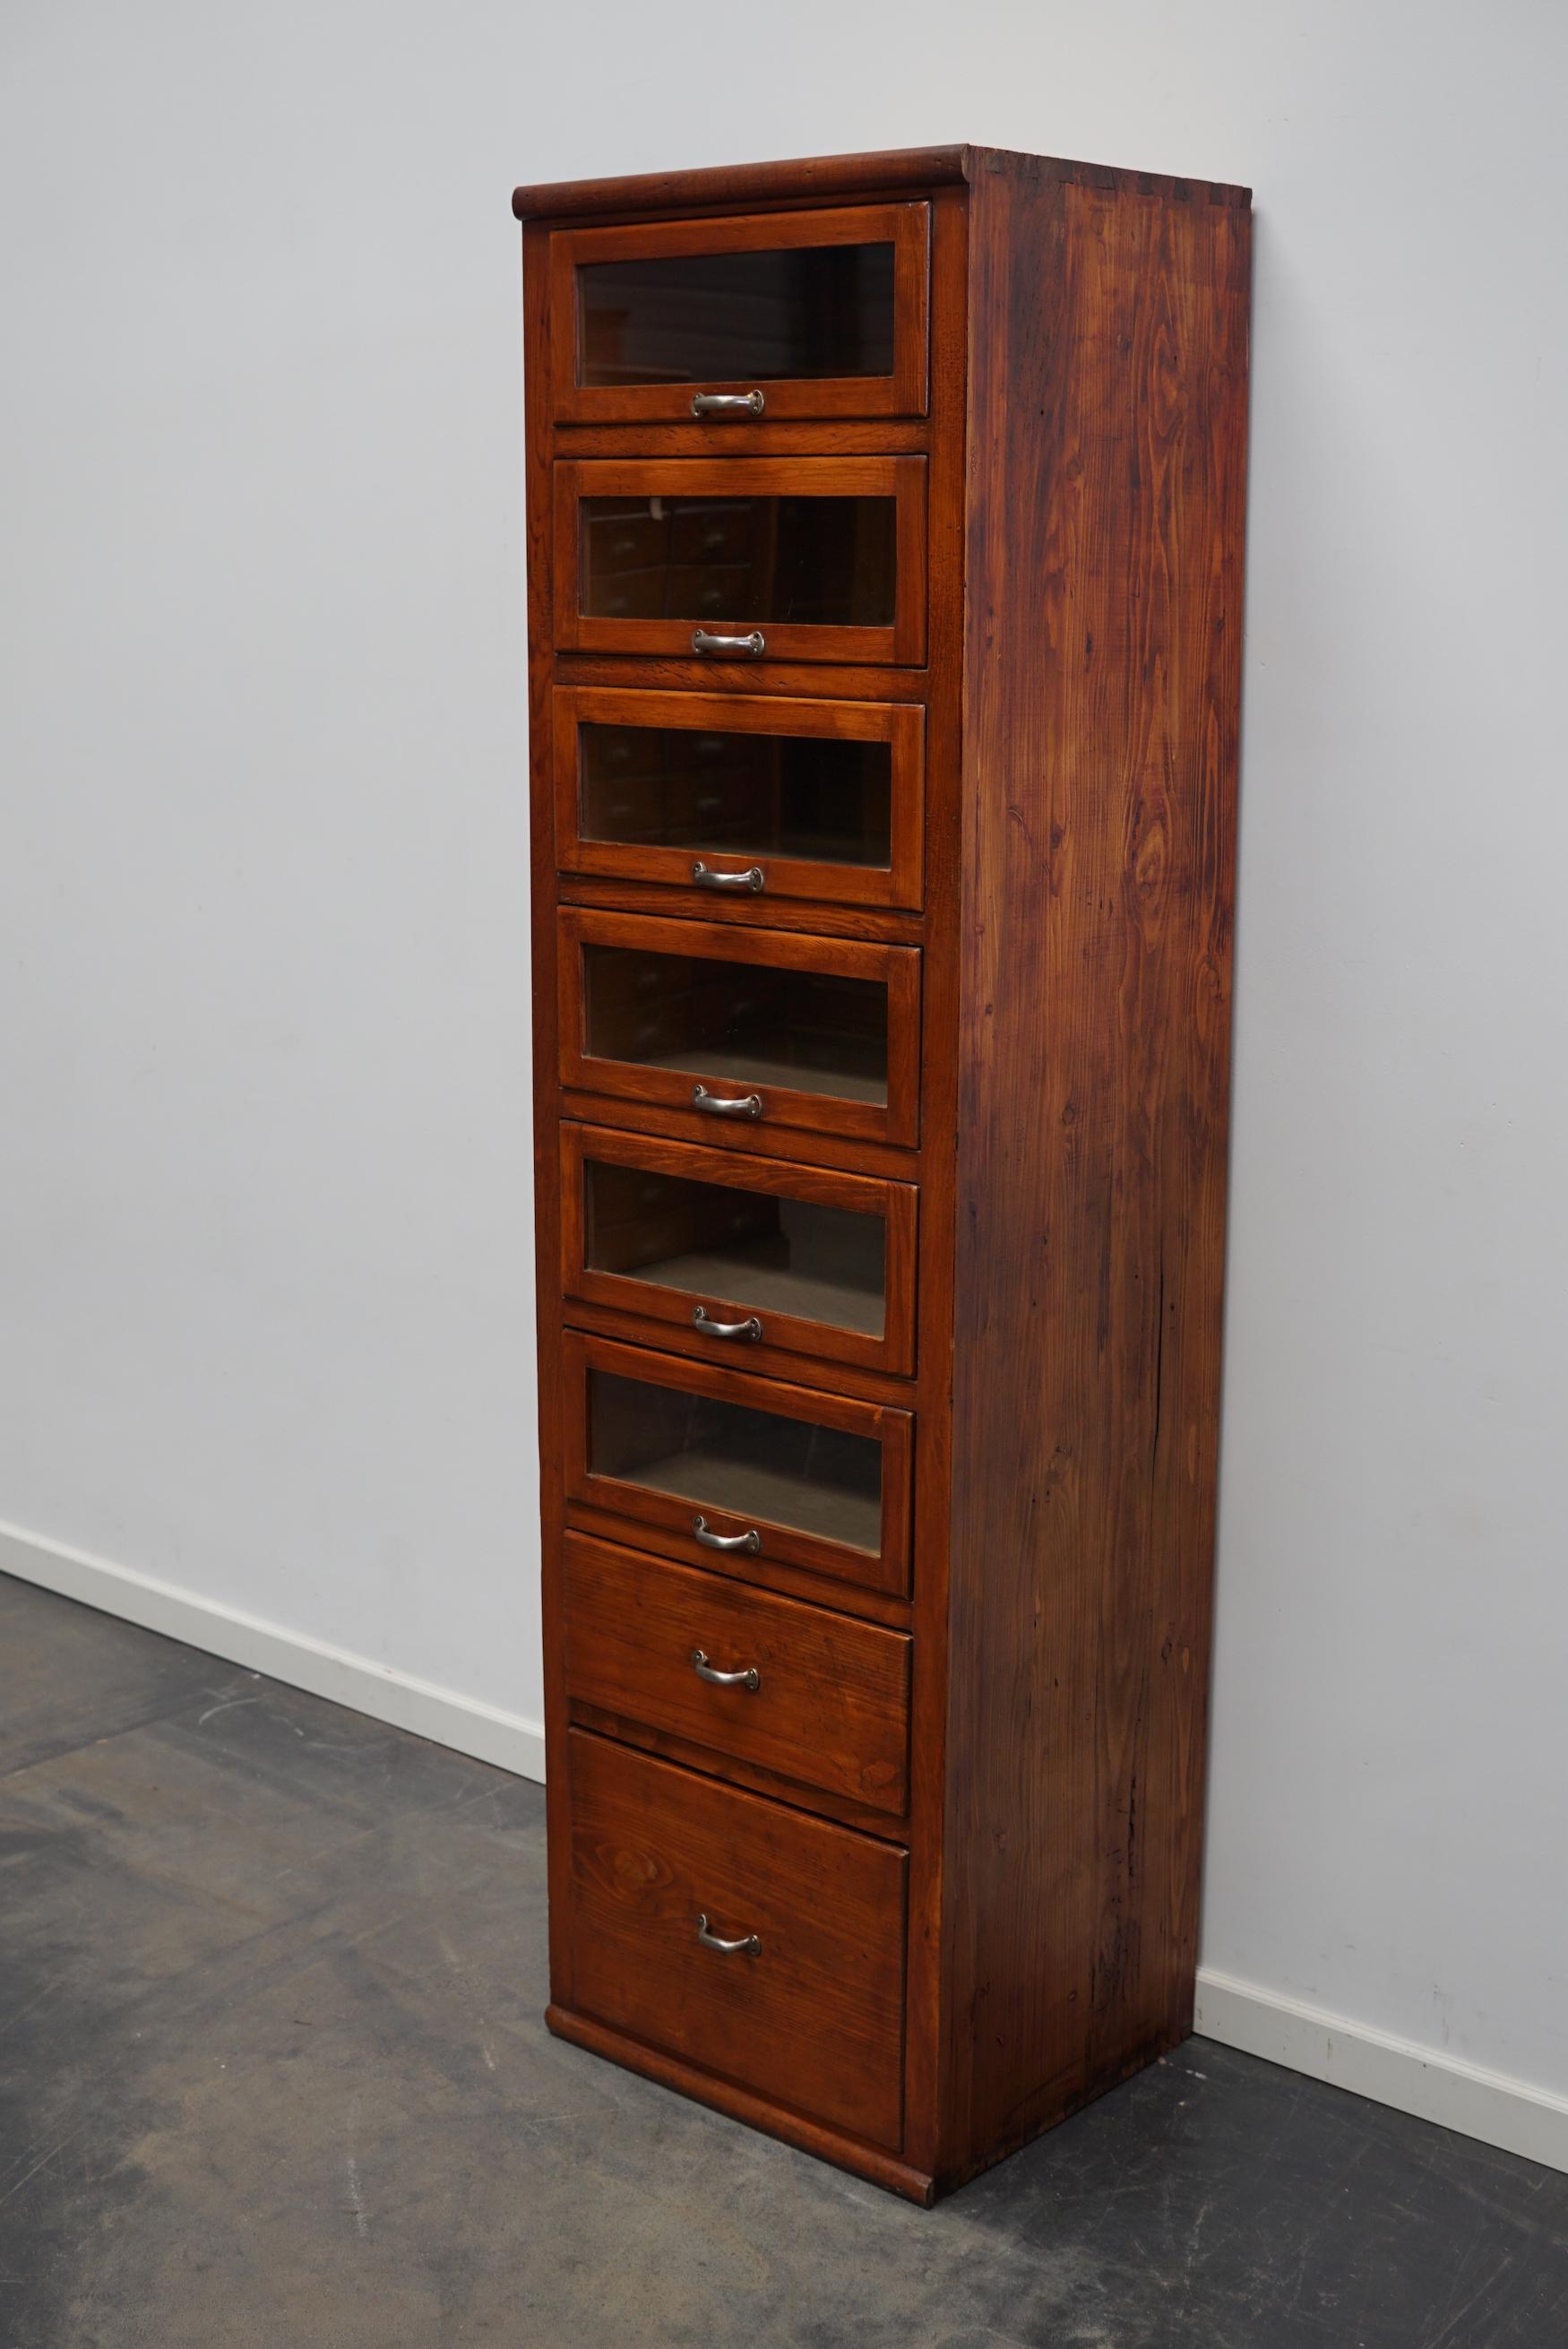 This haberdashery cabinet was produced during the 1950s in Germany. This piece features 8 drawers in pine with glass fronts and metal handles. It was originally used in a shop for sewing supplies. The interior dimensions of the glass fronted drawers